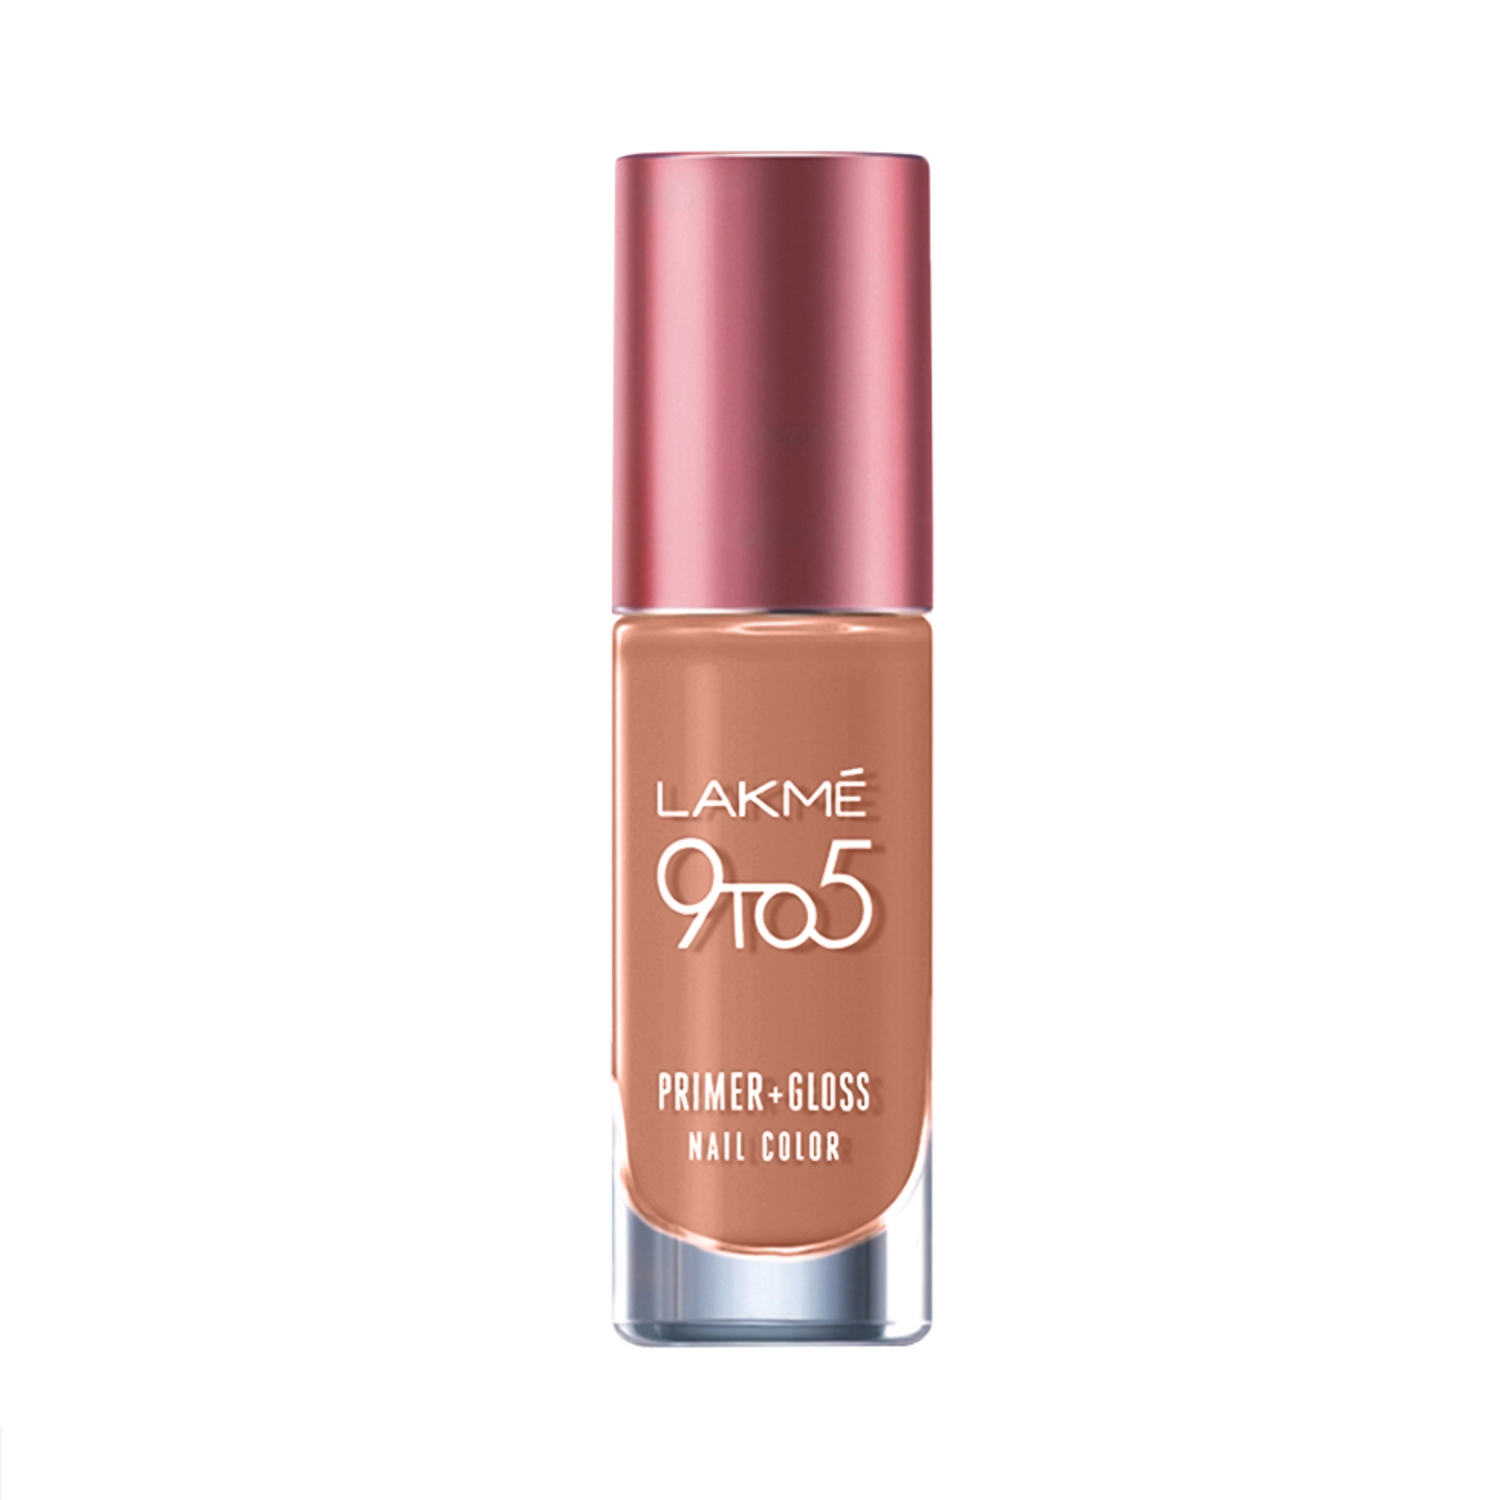 Lakme 9 To 5 Primer + Gloss Nail Color - Staycation Nude (6ml)